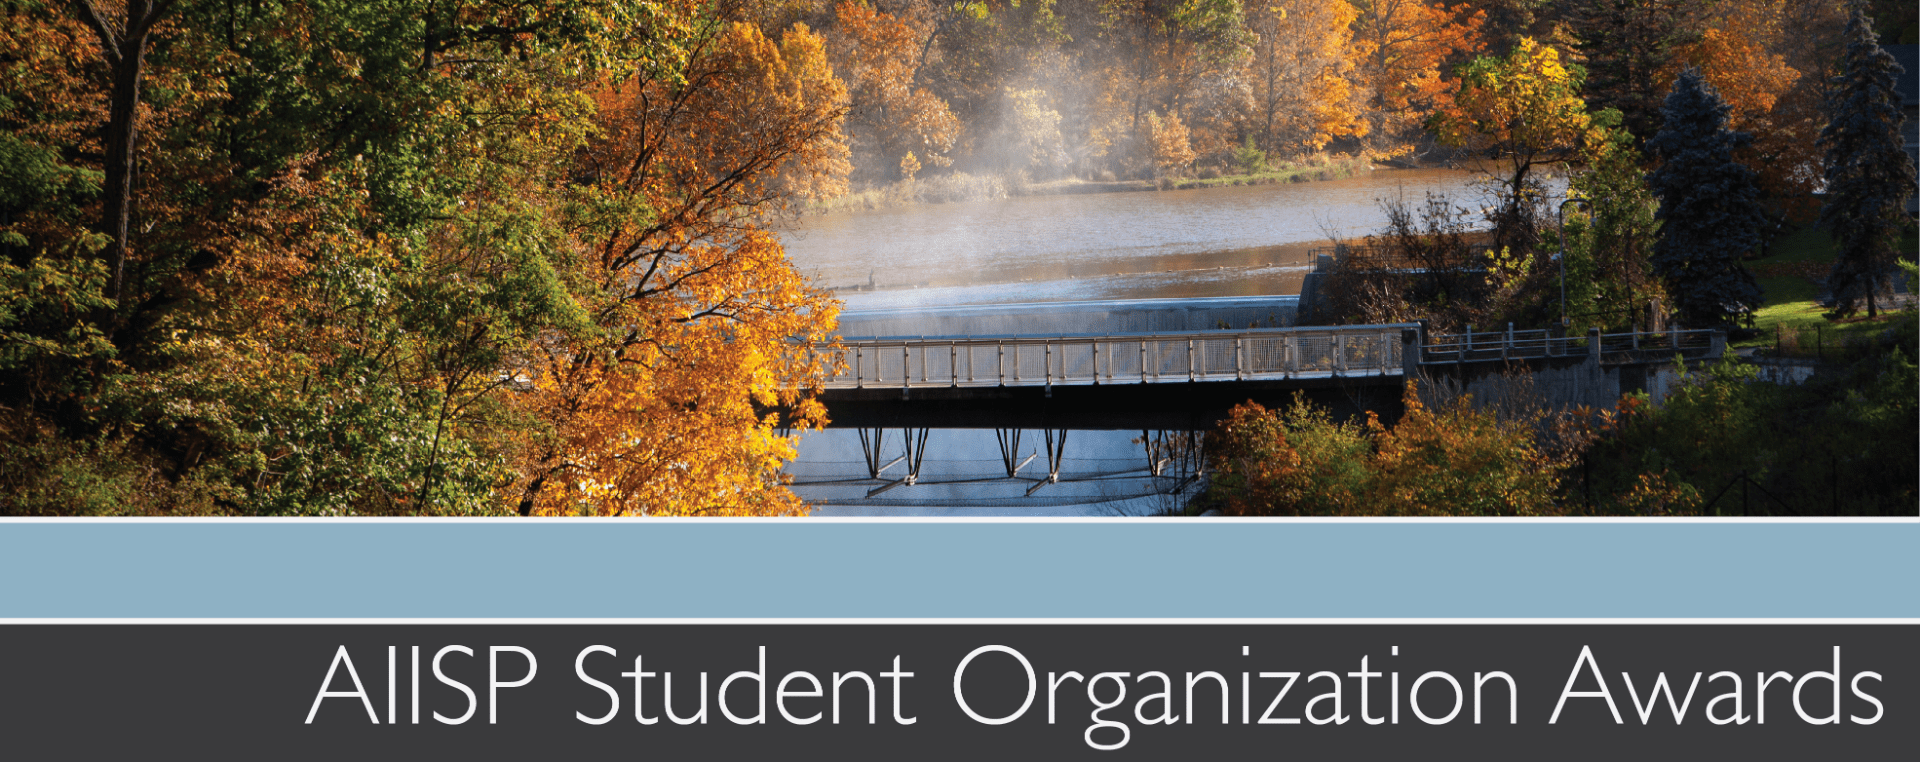 Banner with a photo of a bridge over a waterfall in the fall with text below which says AIISP student organization awards.